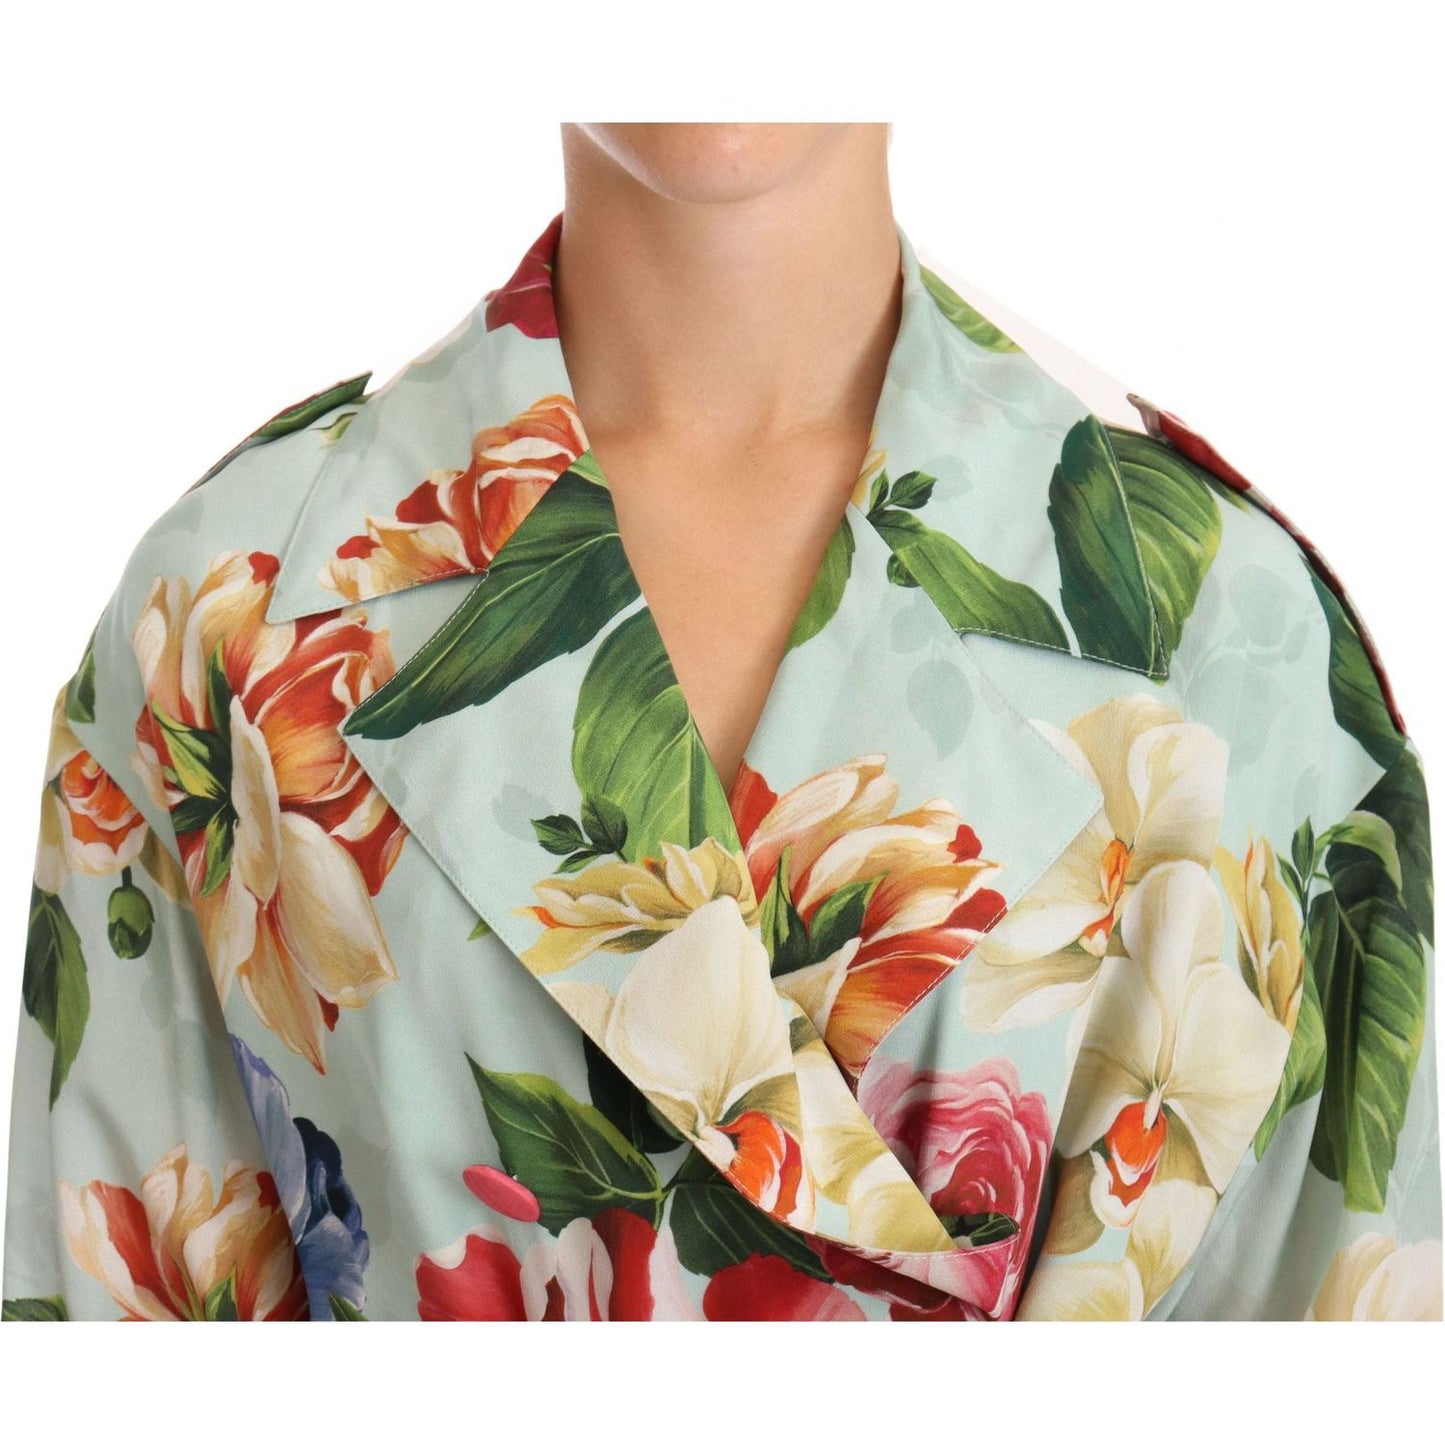 Dolce & Gabbana Elegant Floral Silk Trench Coat WOMAN COATS & JACKETS multicolor-double-breasted-floral-trench-coat-jacket